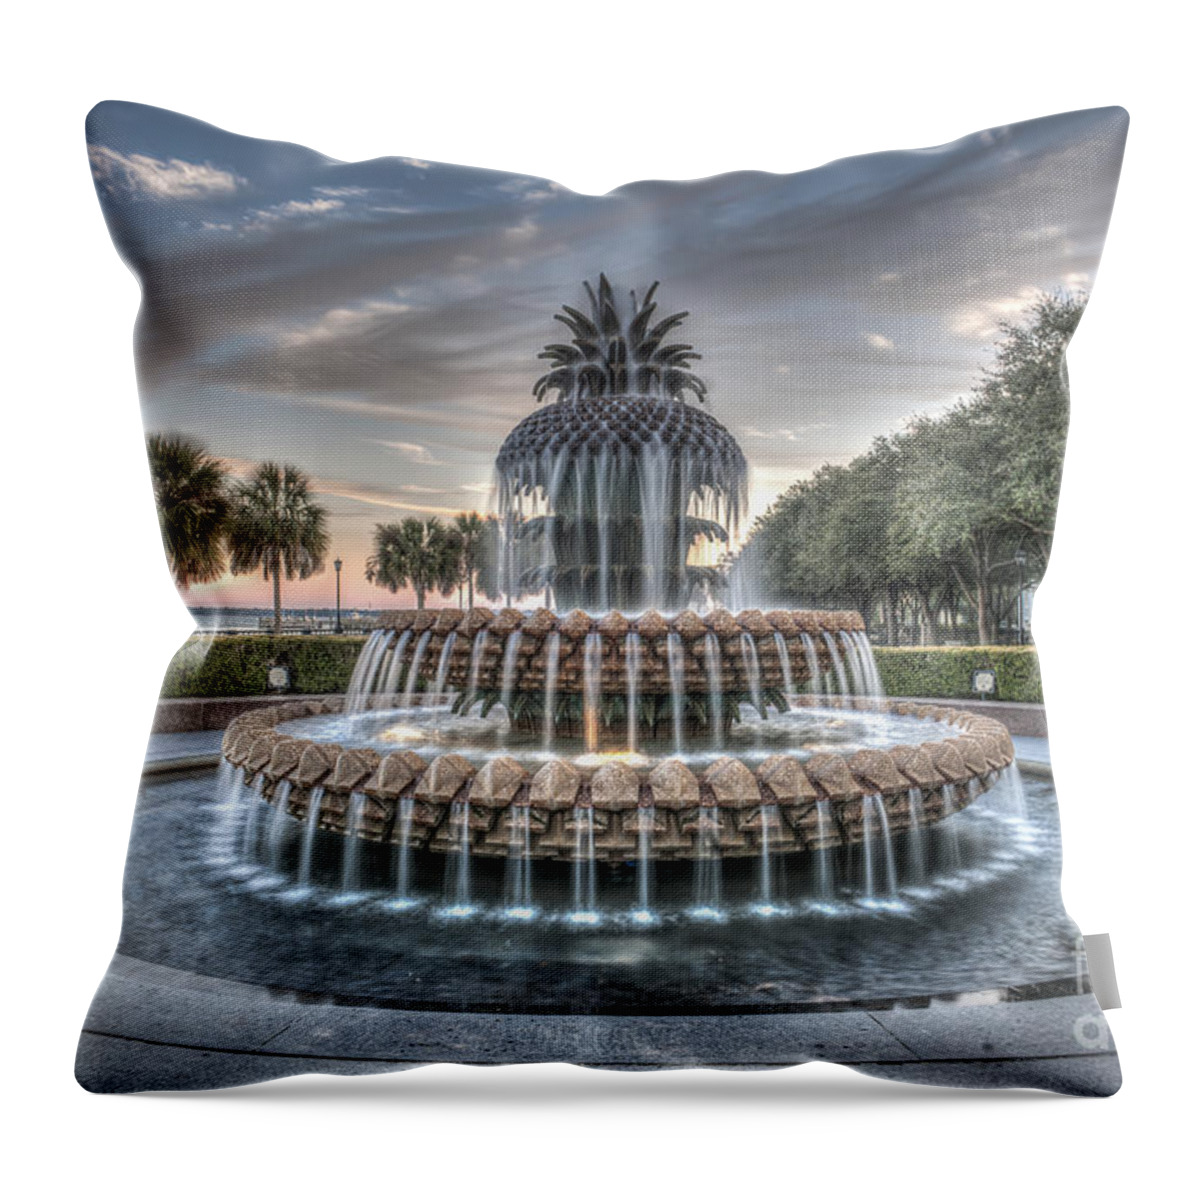 Pineapple Fountain Throw Pillow featuring the photograph Make A Wish by Dale Powell